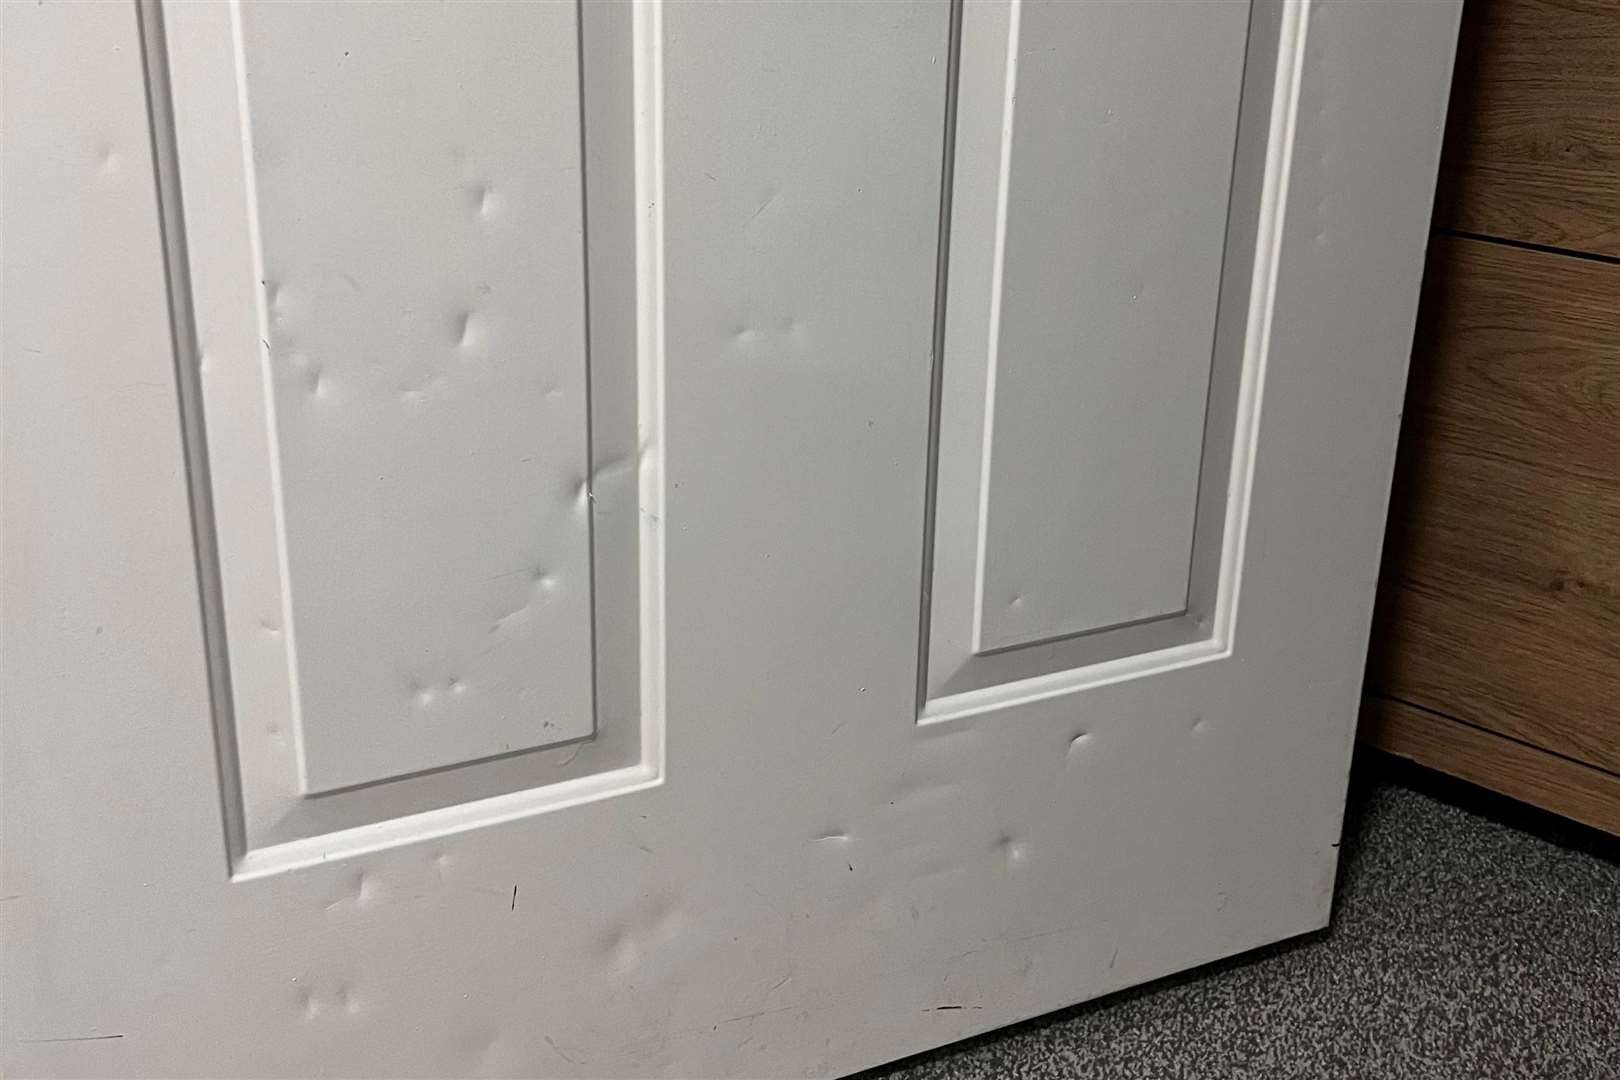 Dents left in the door by the man who tried to break into the flat